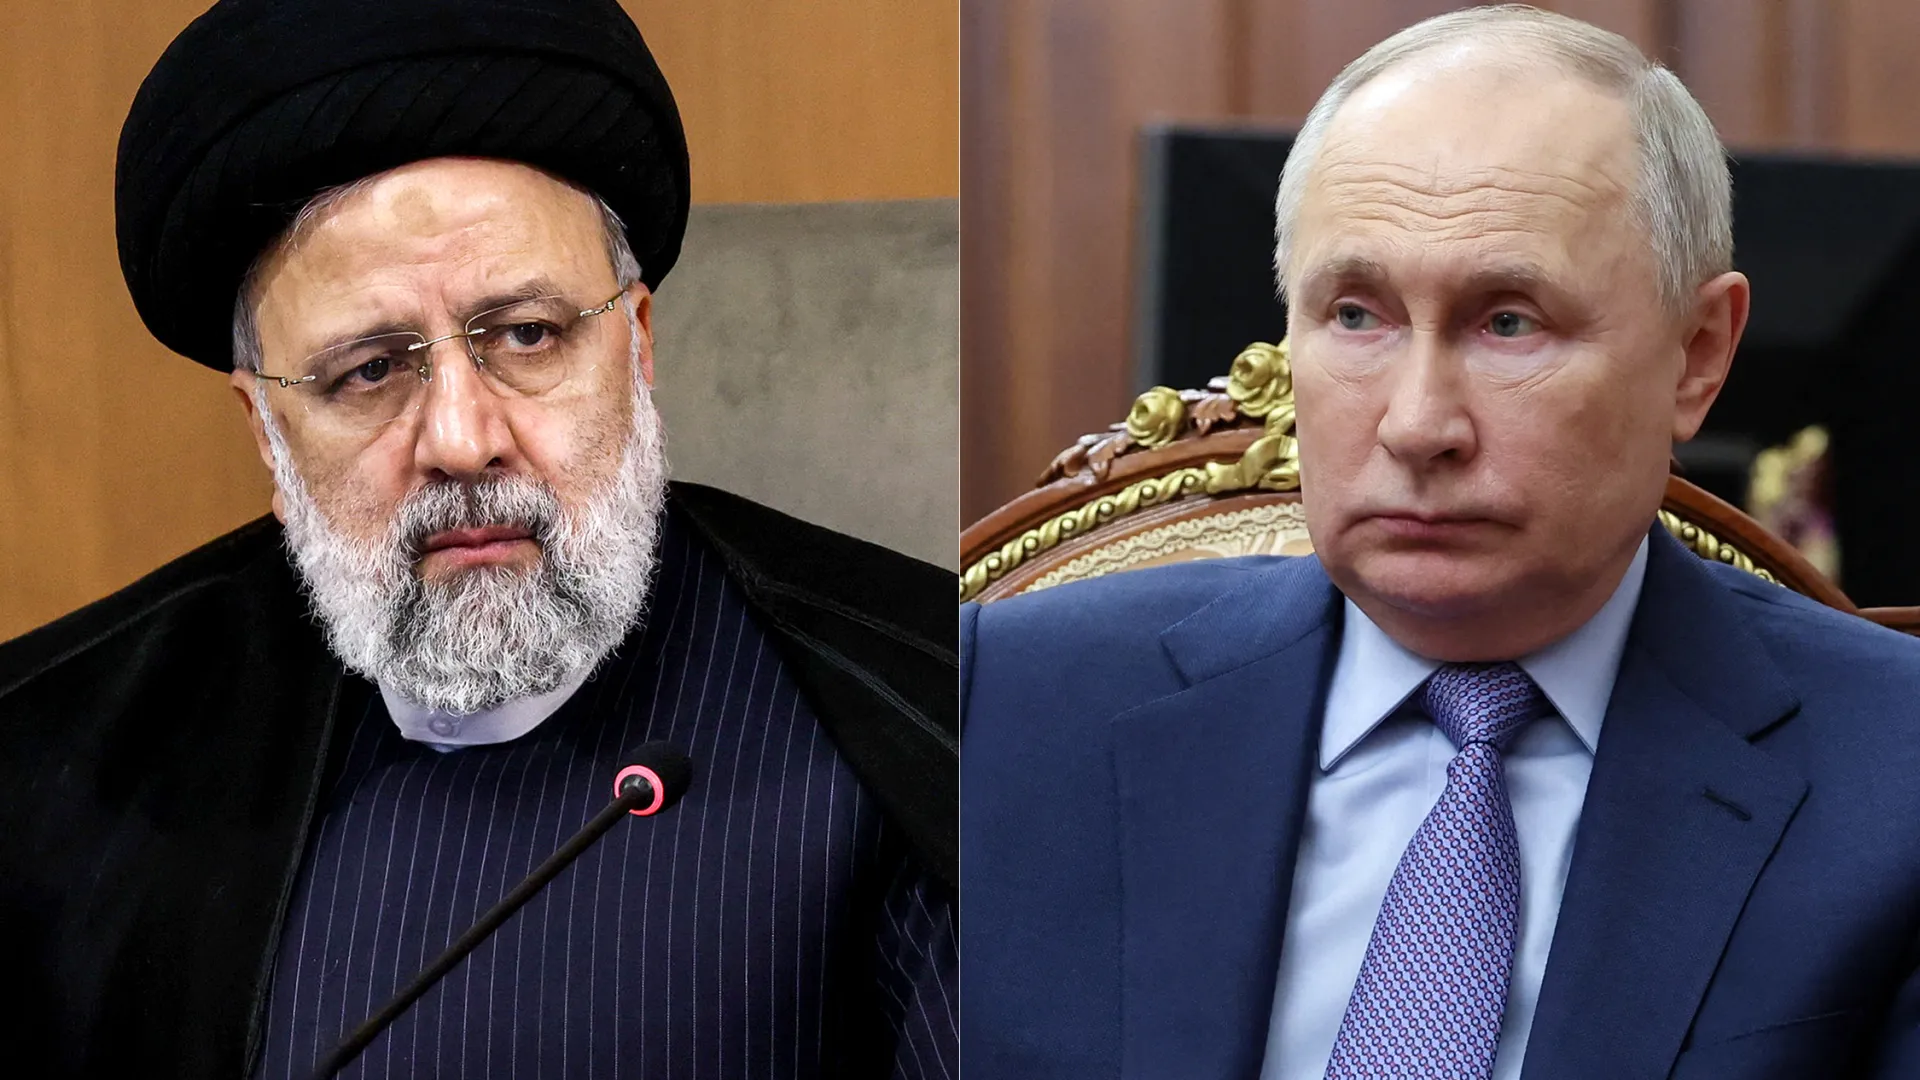 Amid Tensions, Putin Calls For Restraint In Call With Raisi